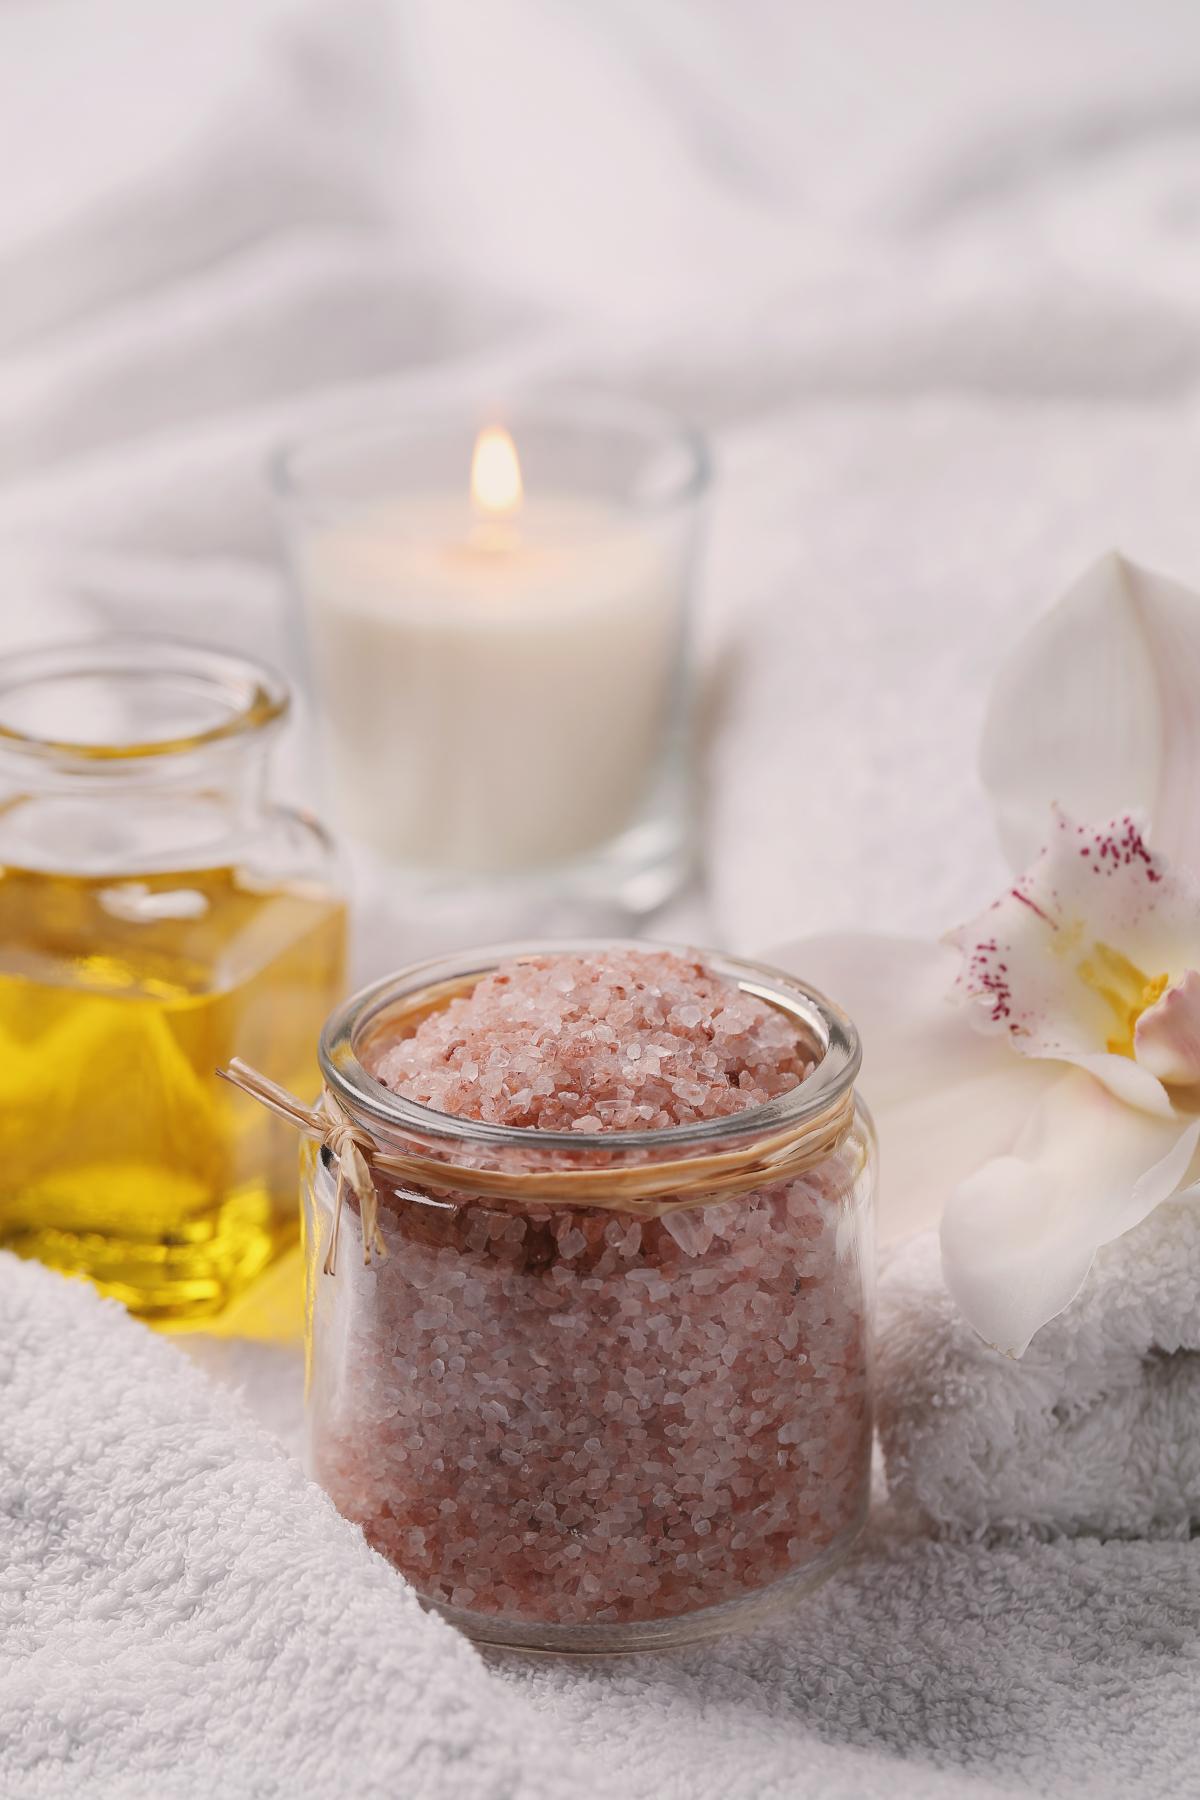 A small glass jar filled with pink salt scrub sits on a white towel. There is a small glass jar of oil behind it to the left, and a lit white candle in a glass jar directly behind the salt scrubs. There is a white lily to the right of the salt scrub.